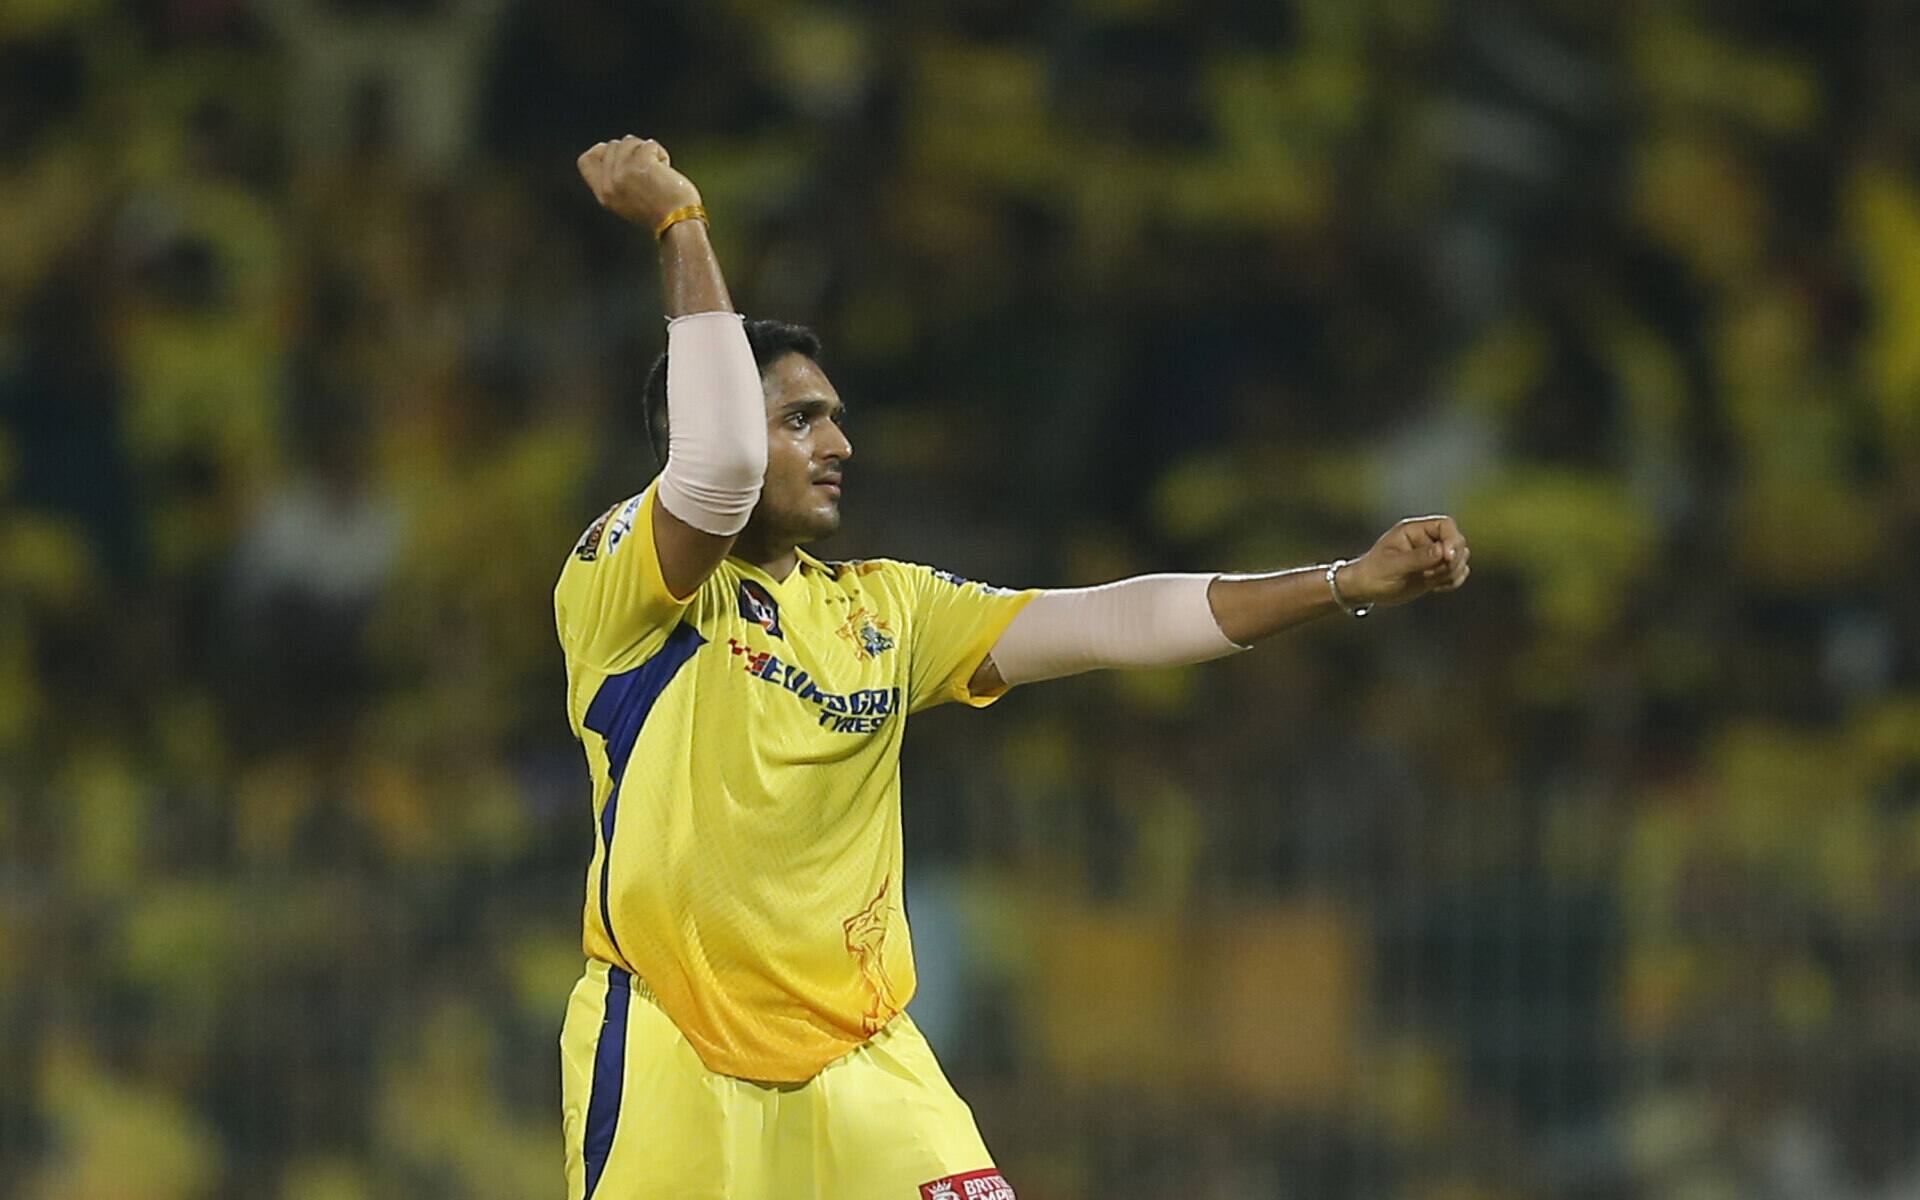 Tushar Deshpande Celebrates Andre Russell's wicket (Source: AP Photo)